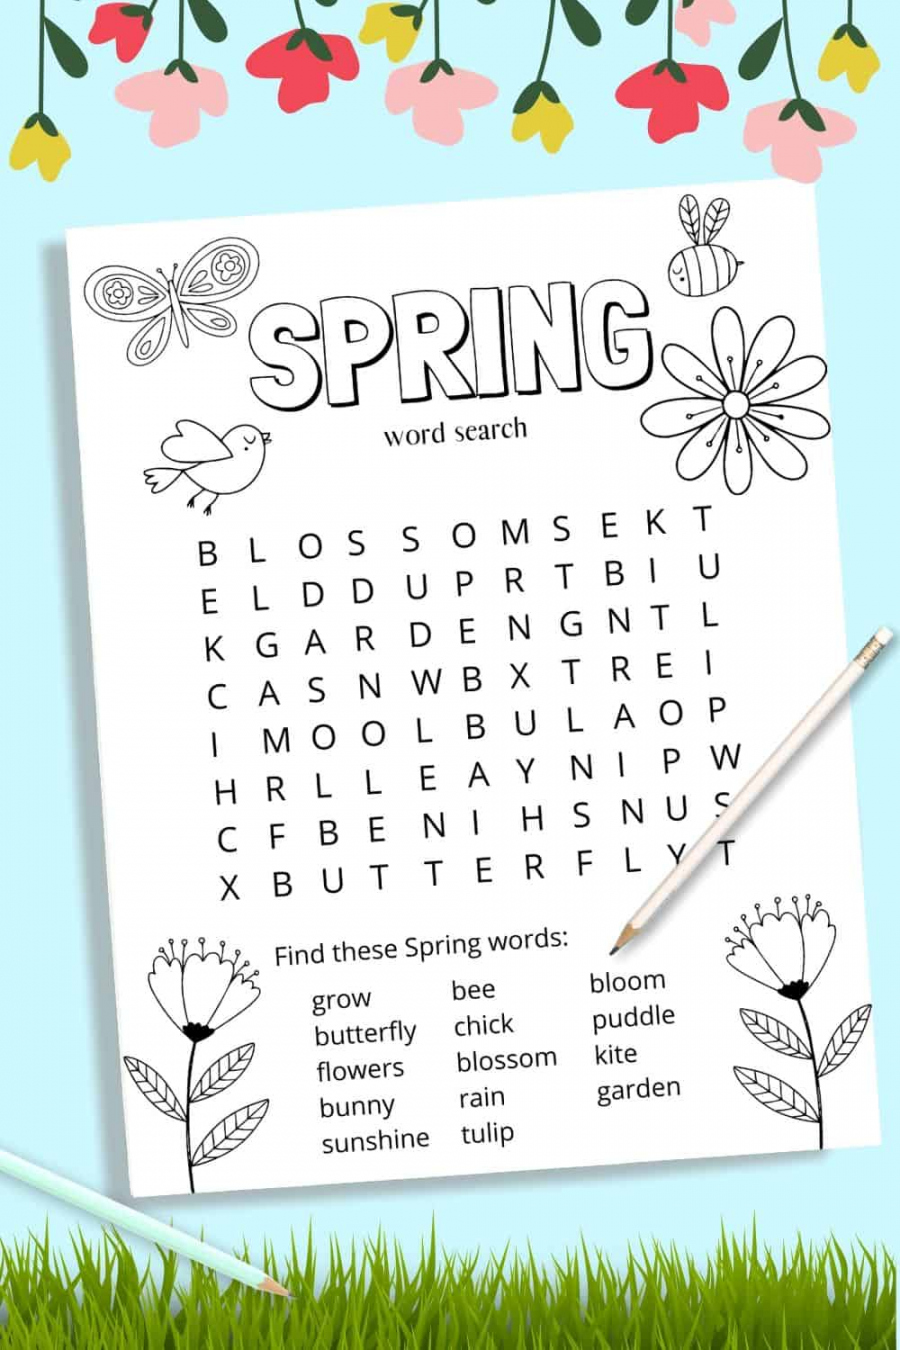 Free Printable Word Searches For Kids - Printable - Spring Printable Word Search for Kids -